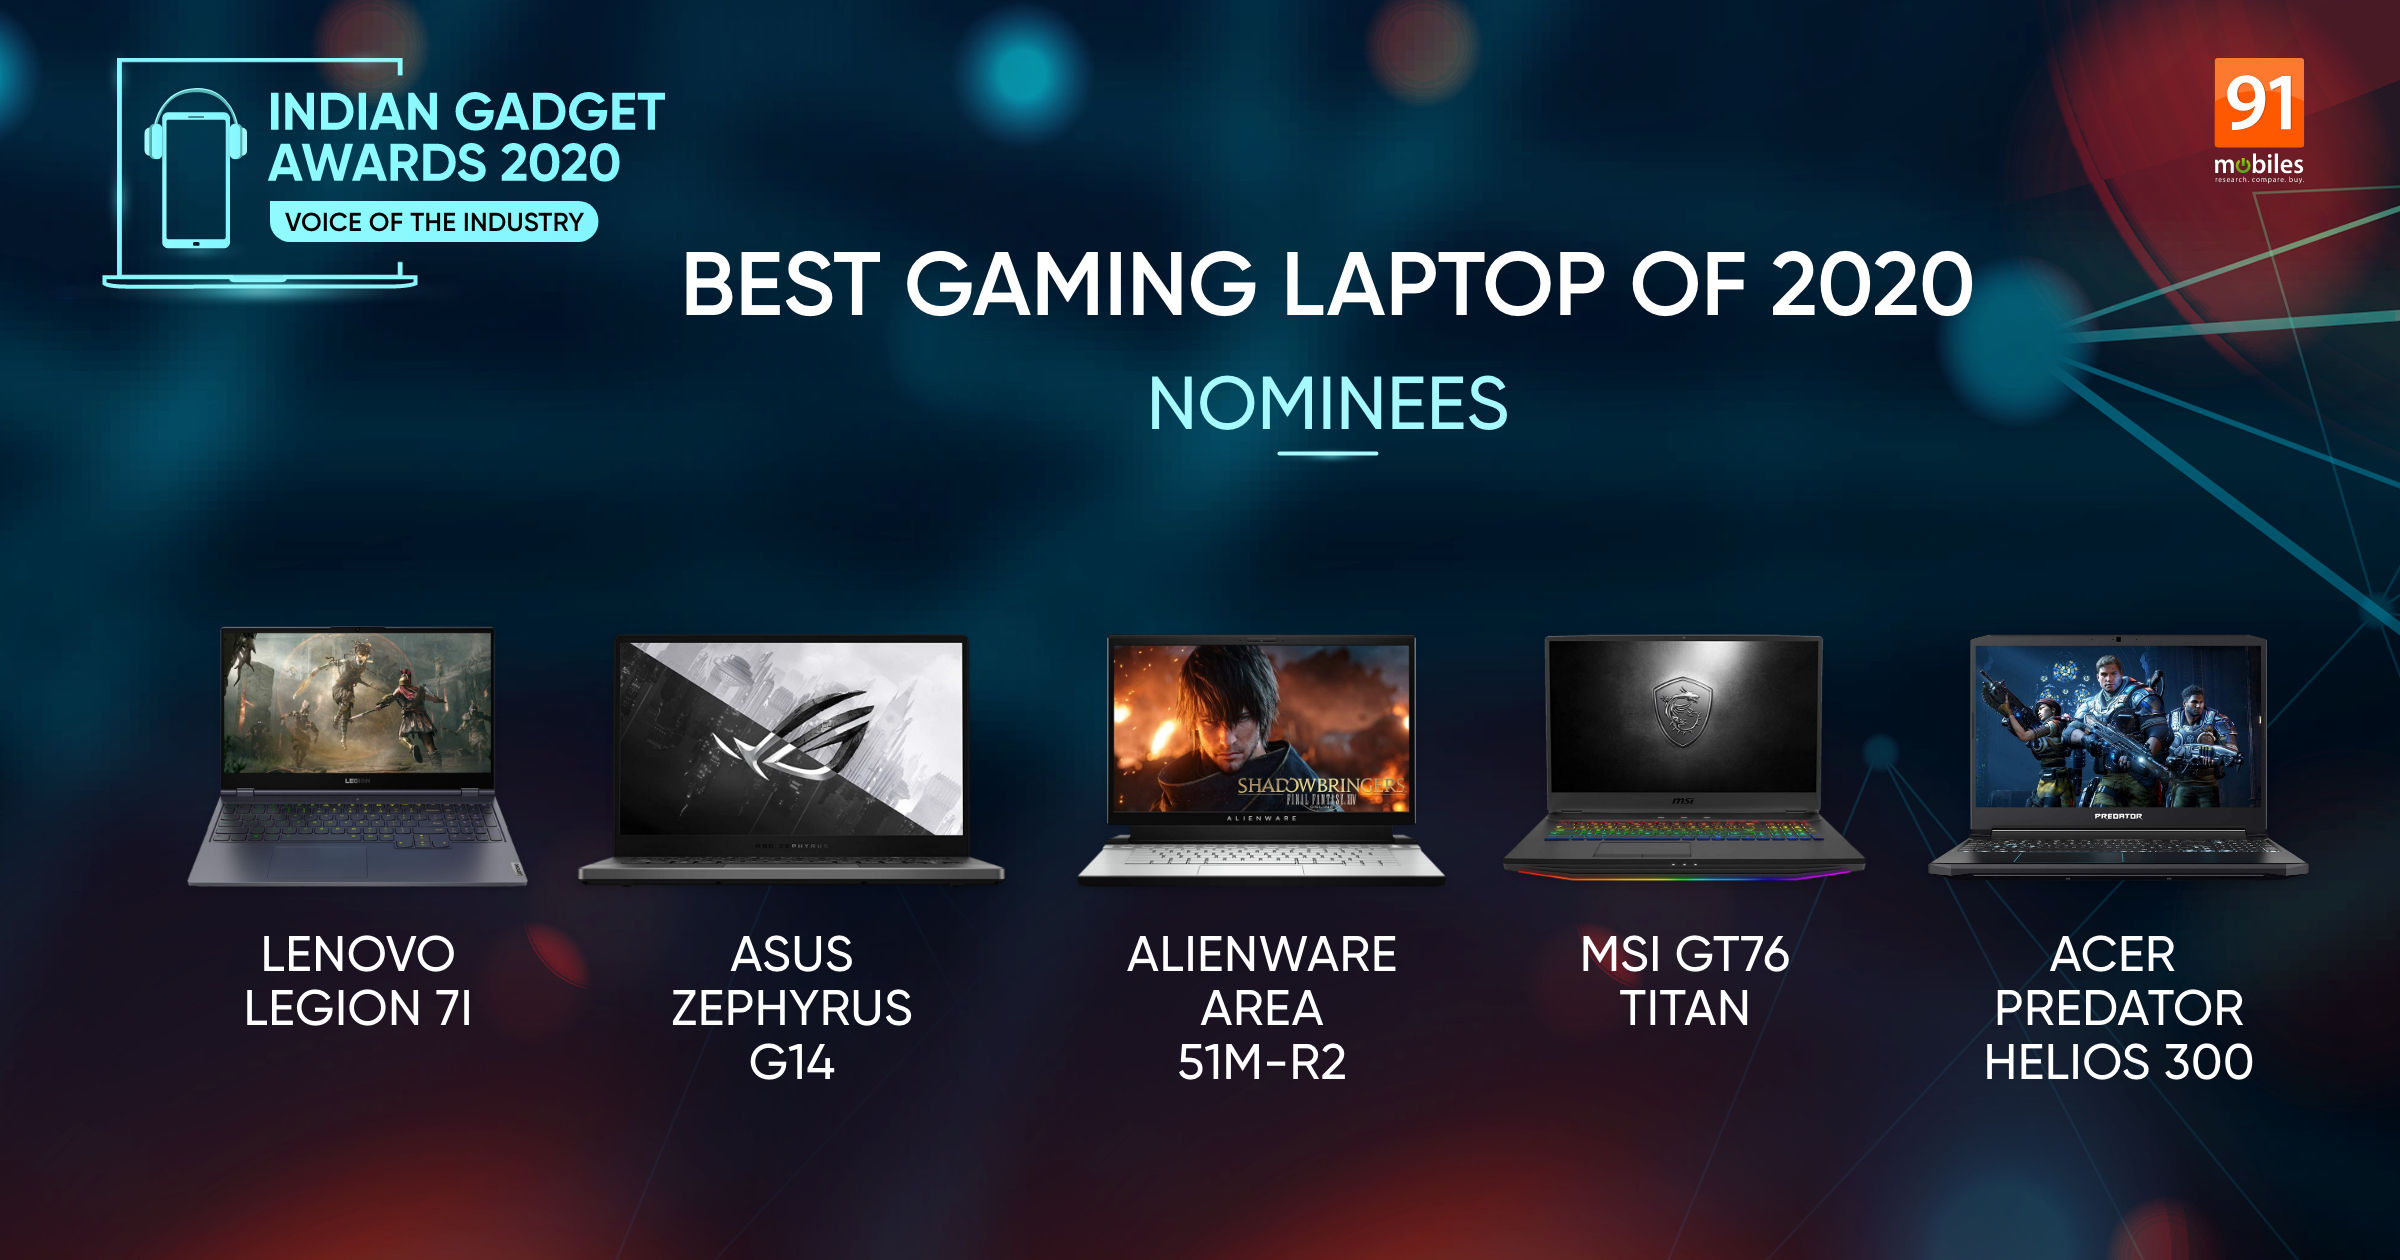 Indian Gadget Awards – Best Gaming Laptop of 2020 nominees